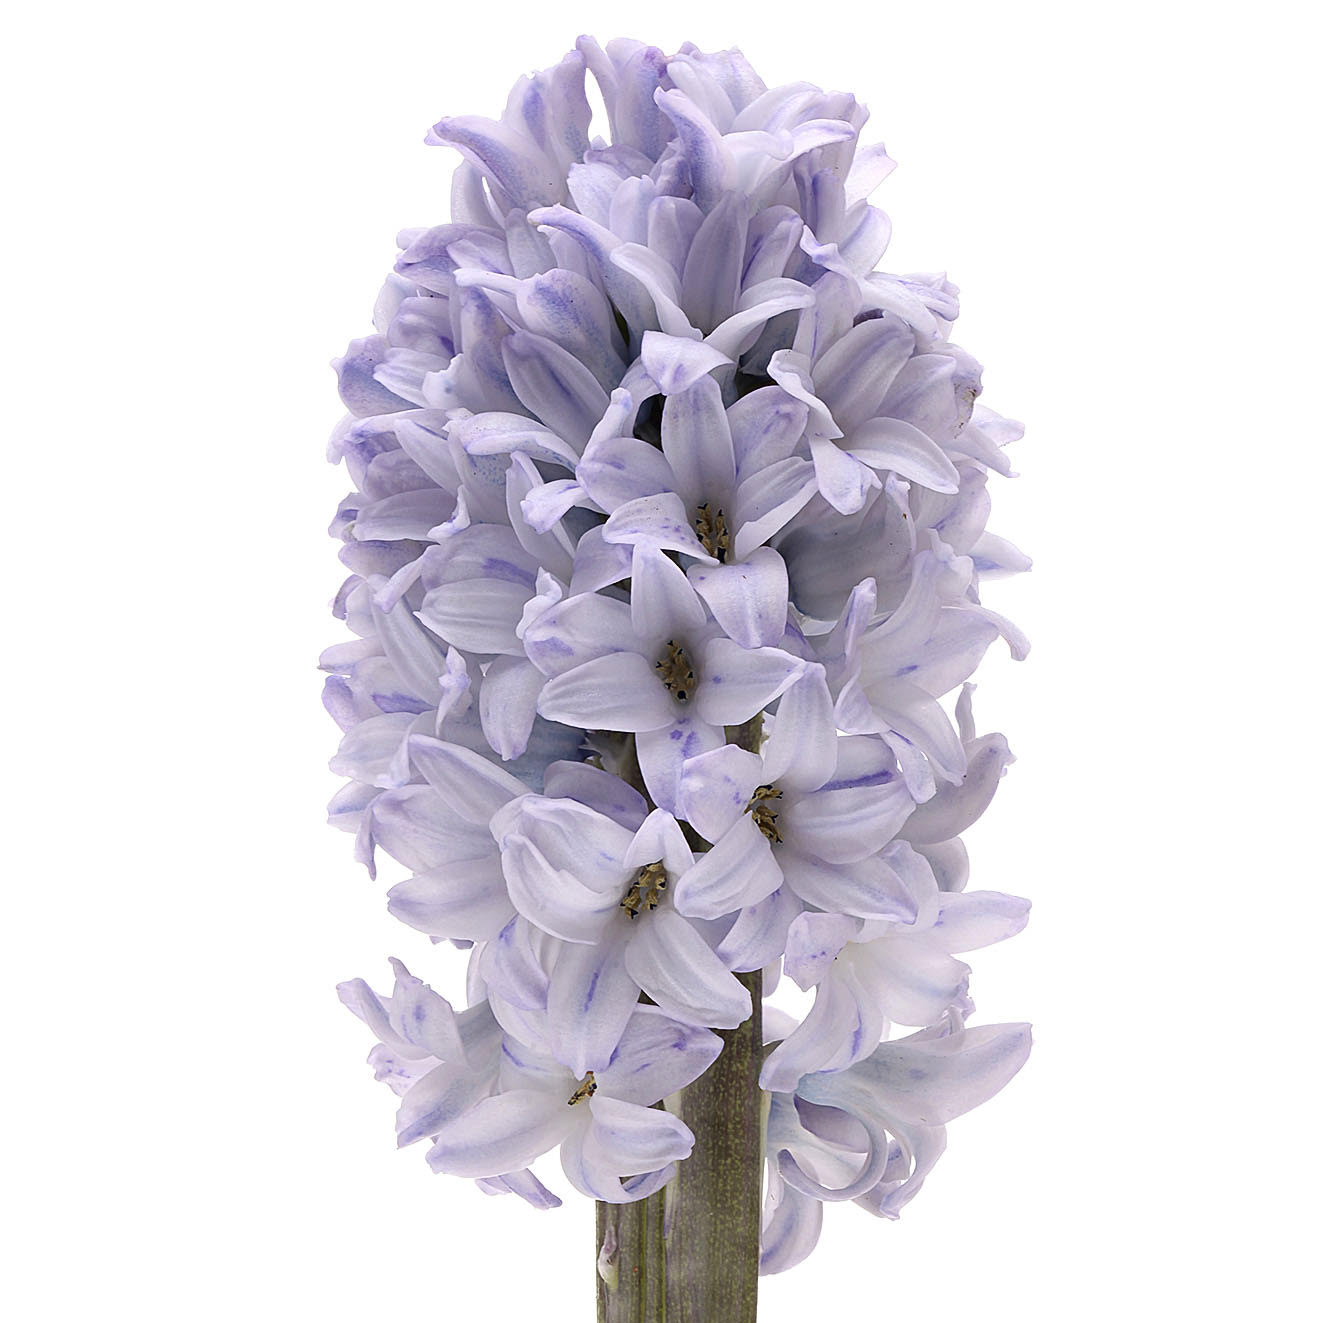 The Colorful Hyacinth and Its Rich Backstory001